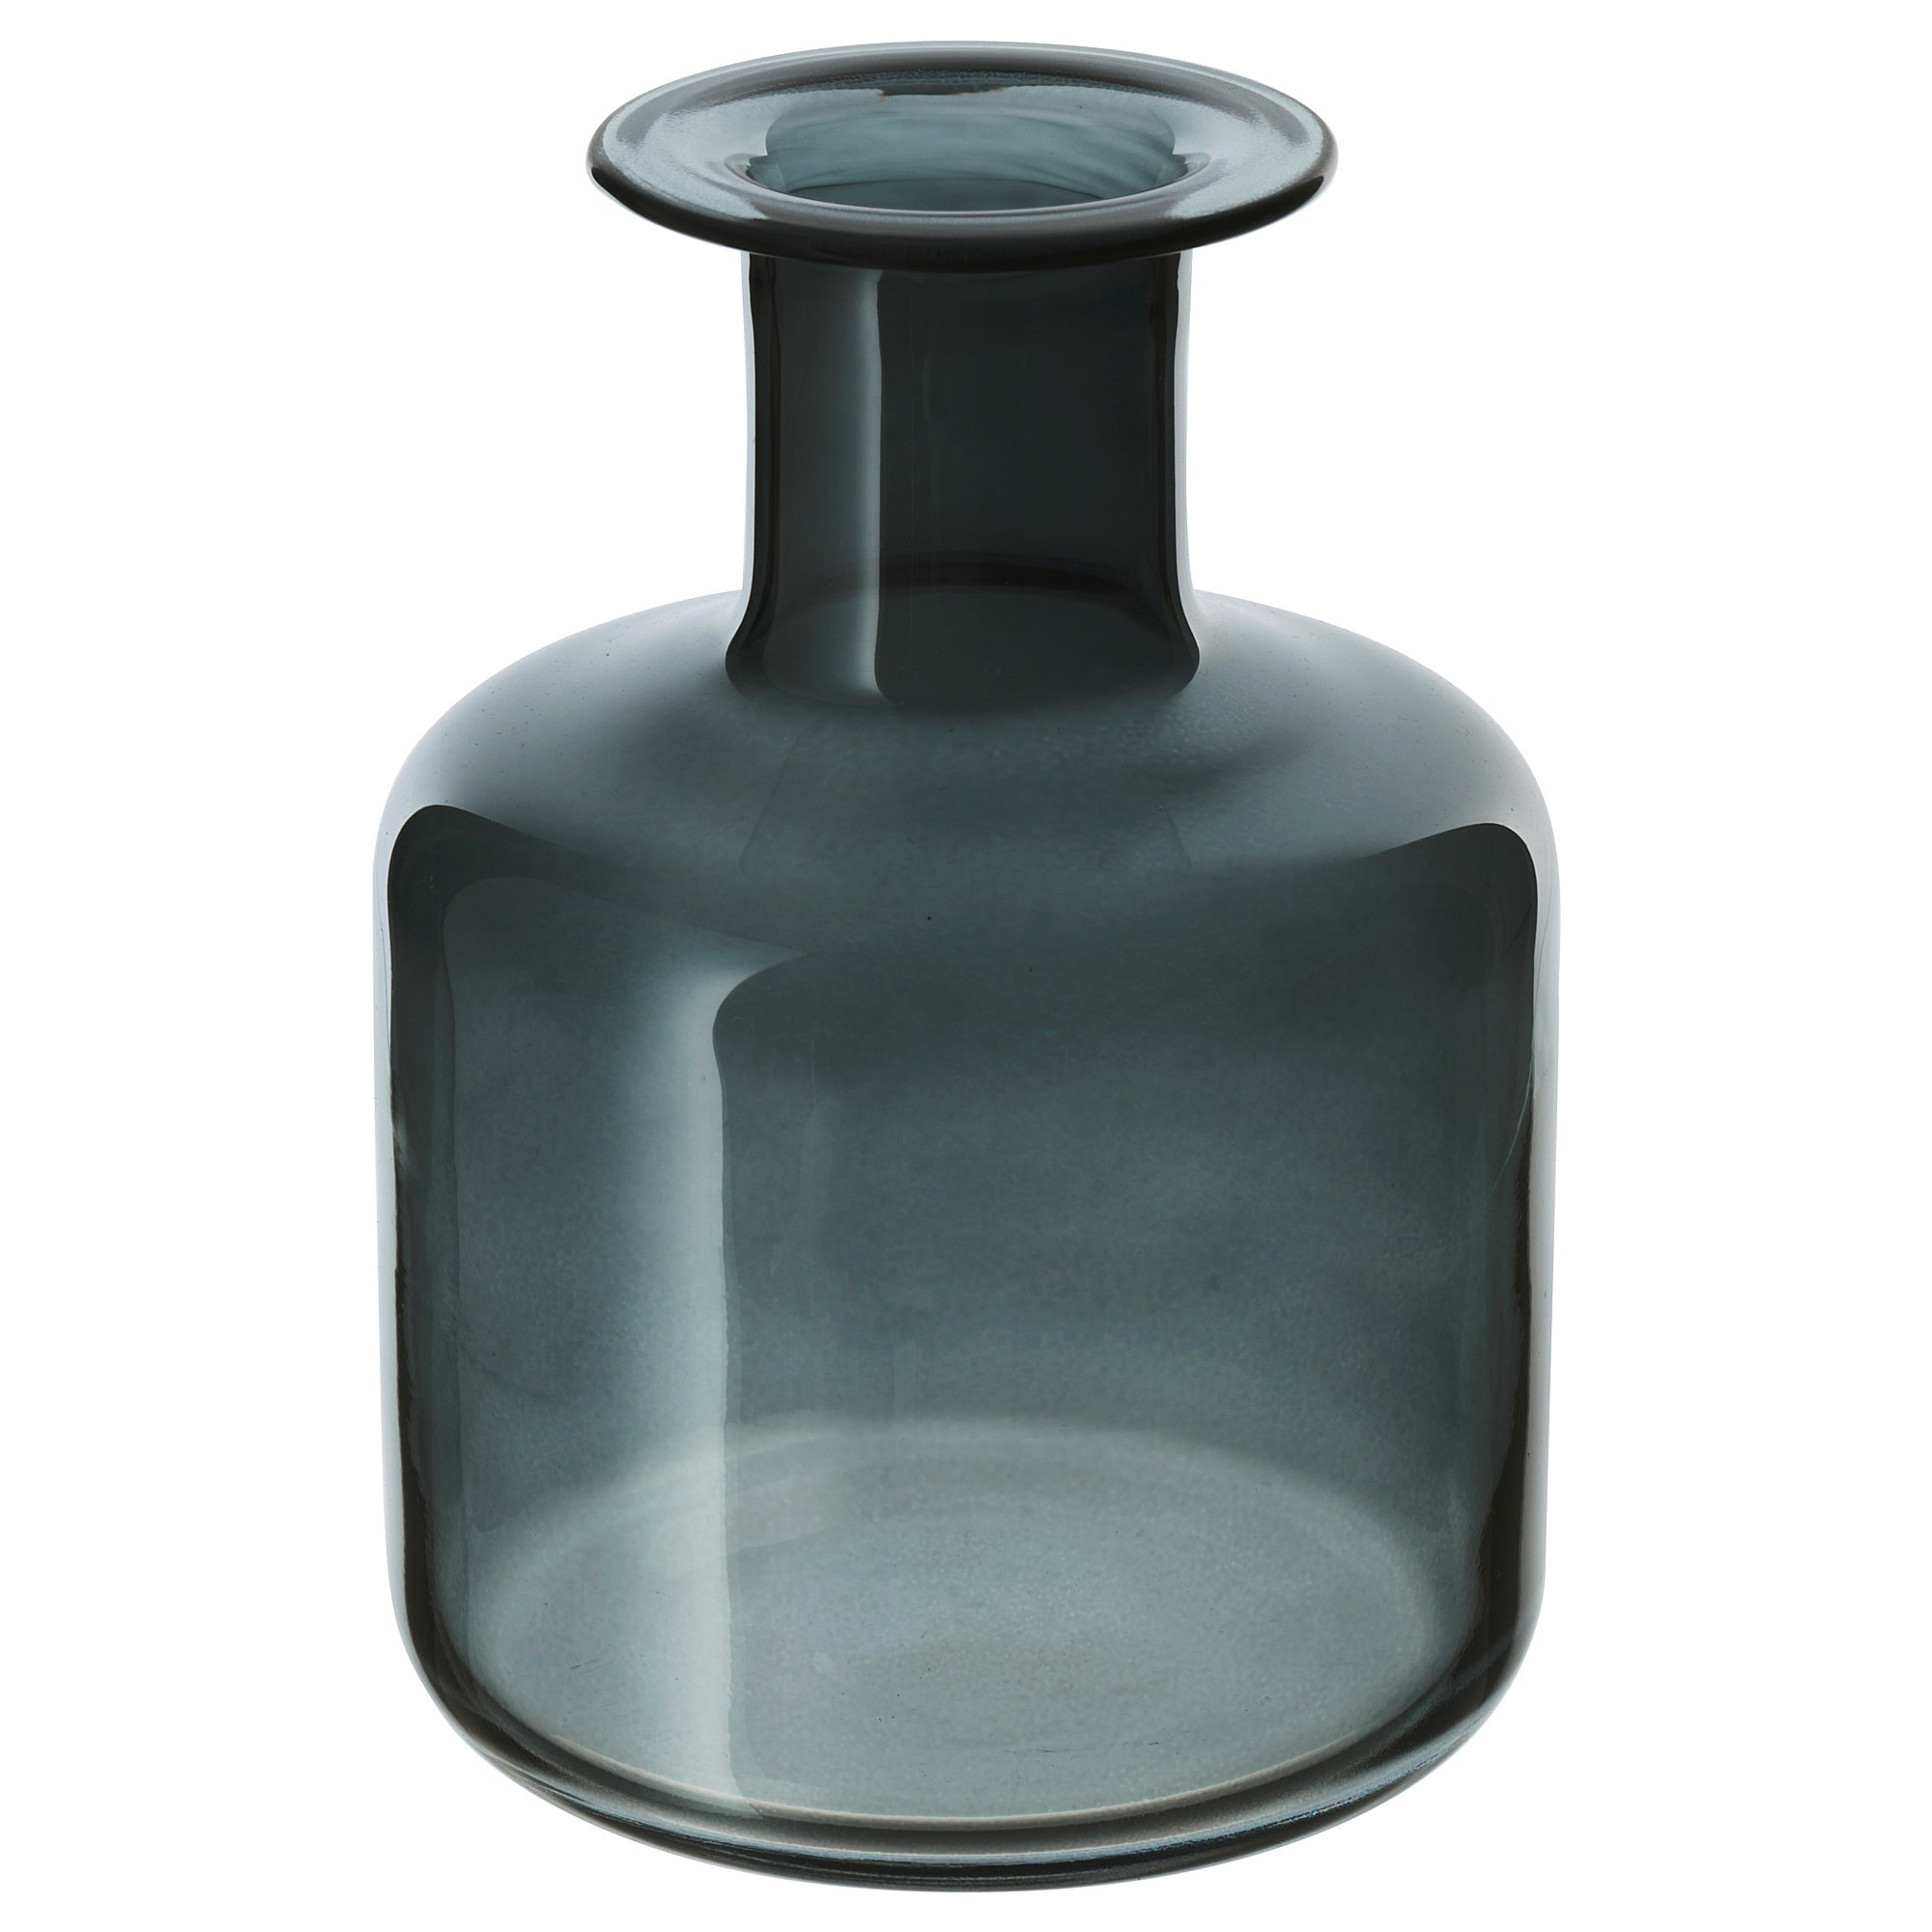 11 attractive 4x4 Square Vase 2024 free download 4x4 square vase of glass flower vases and bowls ikea within ikea pepparkorn vase mouth blown each vase has been shaped by a skilled craftsman